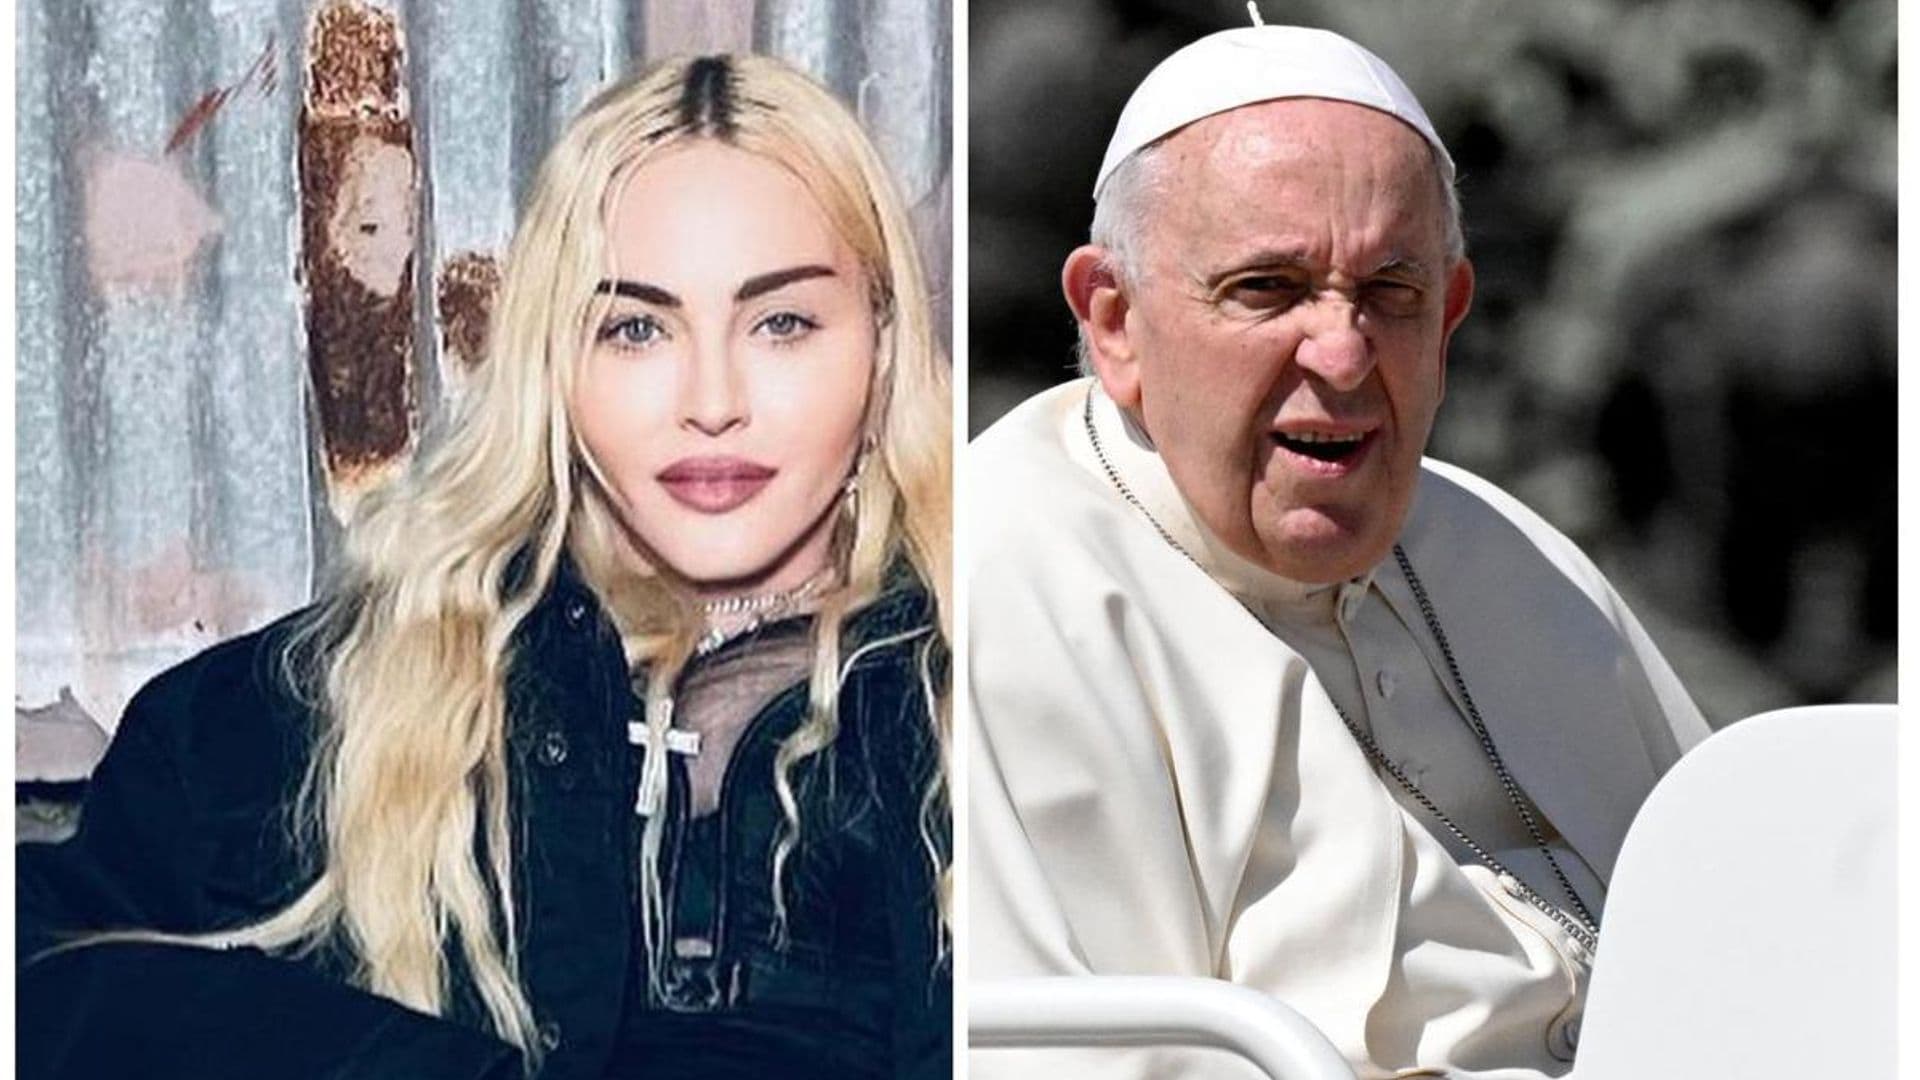 Why Madonna has ‘important matters’ to discuss with Pope Francis